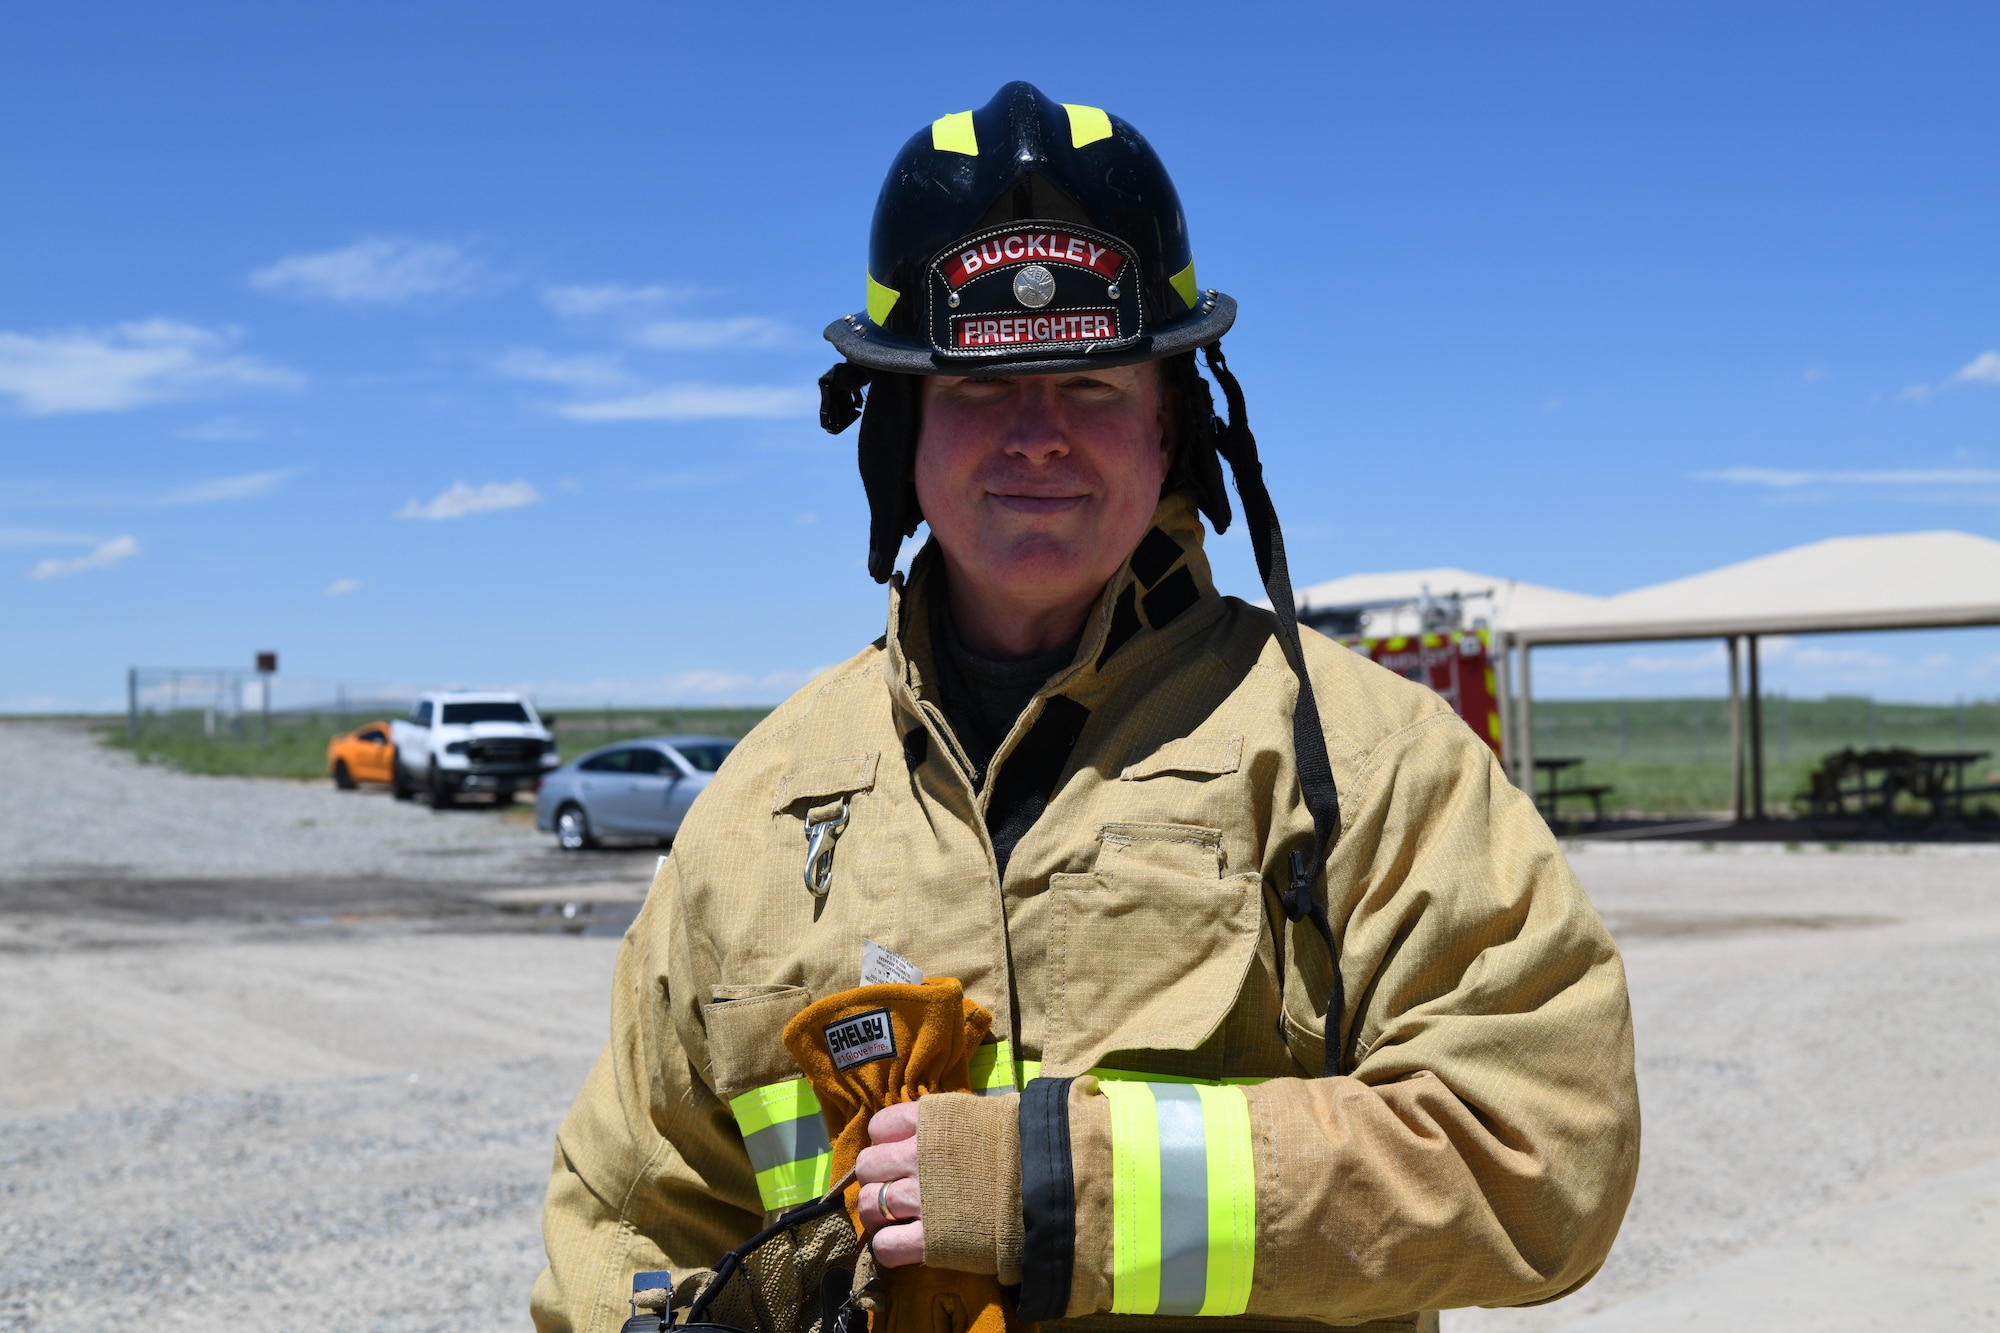 Lt. Col. Michael Hall, Buckley Garrison Inspector General, prepares for a fire exercise, May 25, 2021, on Buckley Air Force Base, Colo. The Buckley Fire Department showed Buckley Garrison leadership what their duties may entail with a simulated two-story fire exercise. (U.S. Space Force photo by Senior Airman Michael D. Mathews)